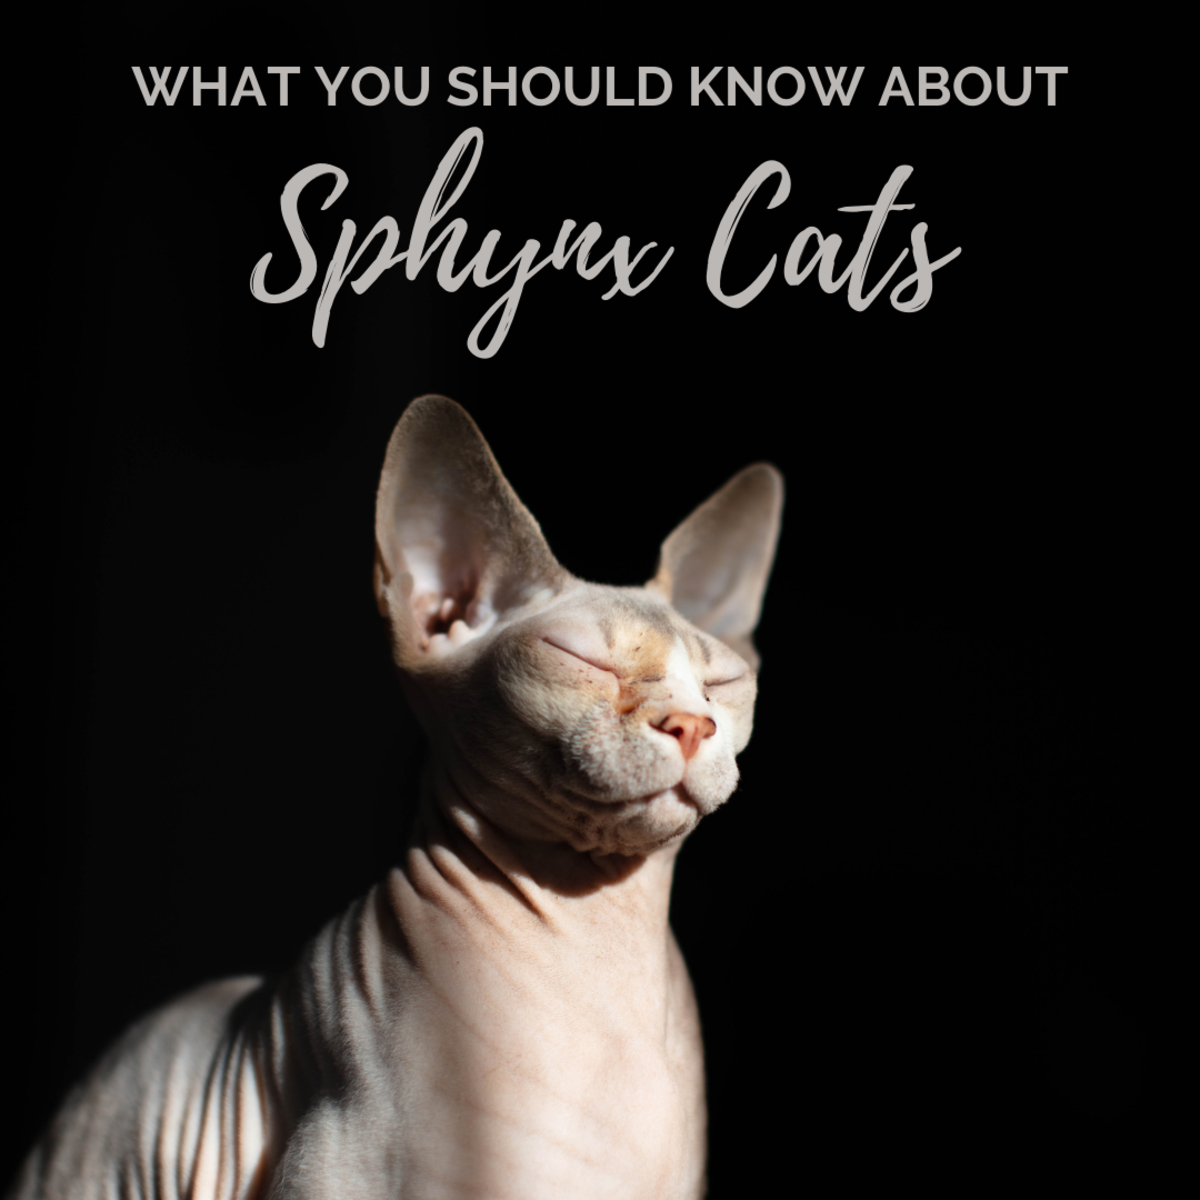 III. Common Misconceptions about Sphynx Cats